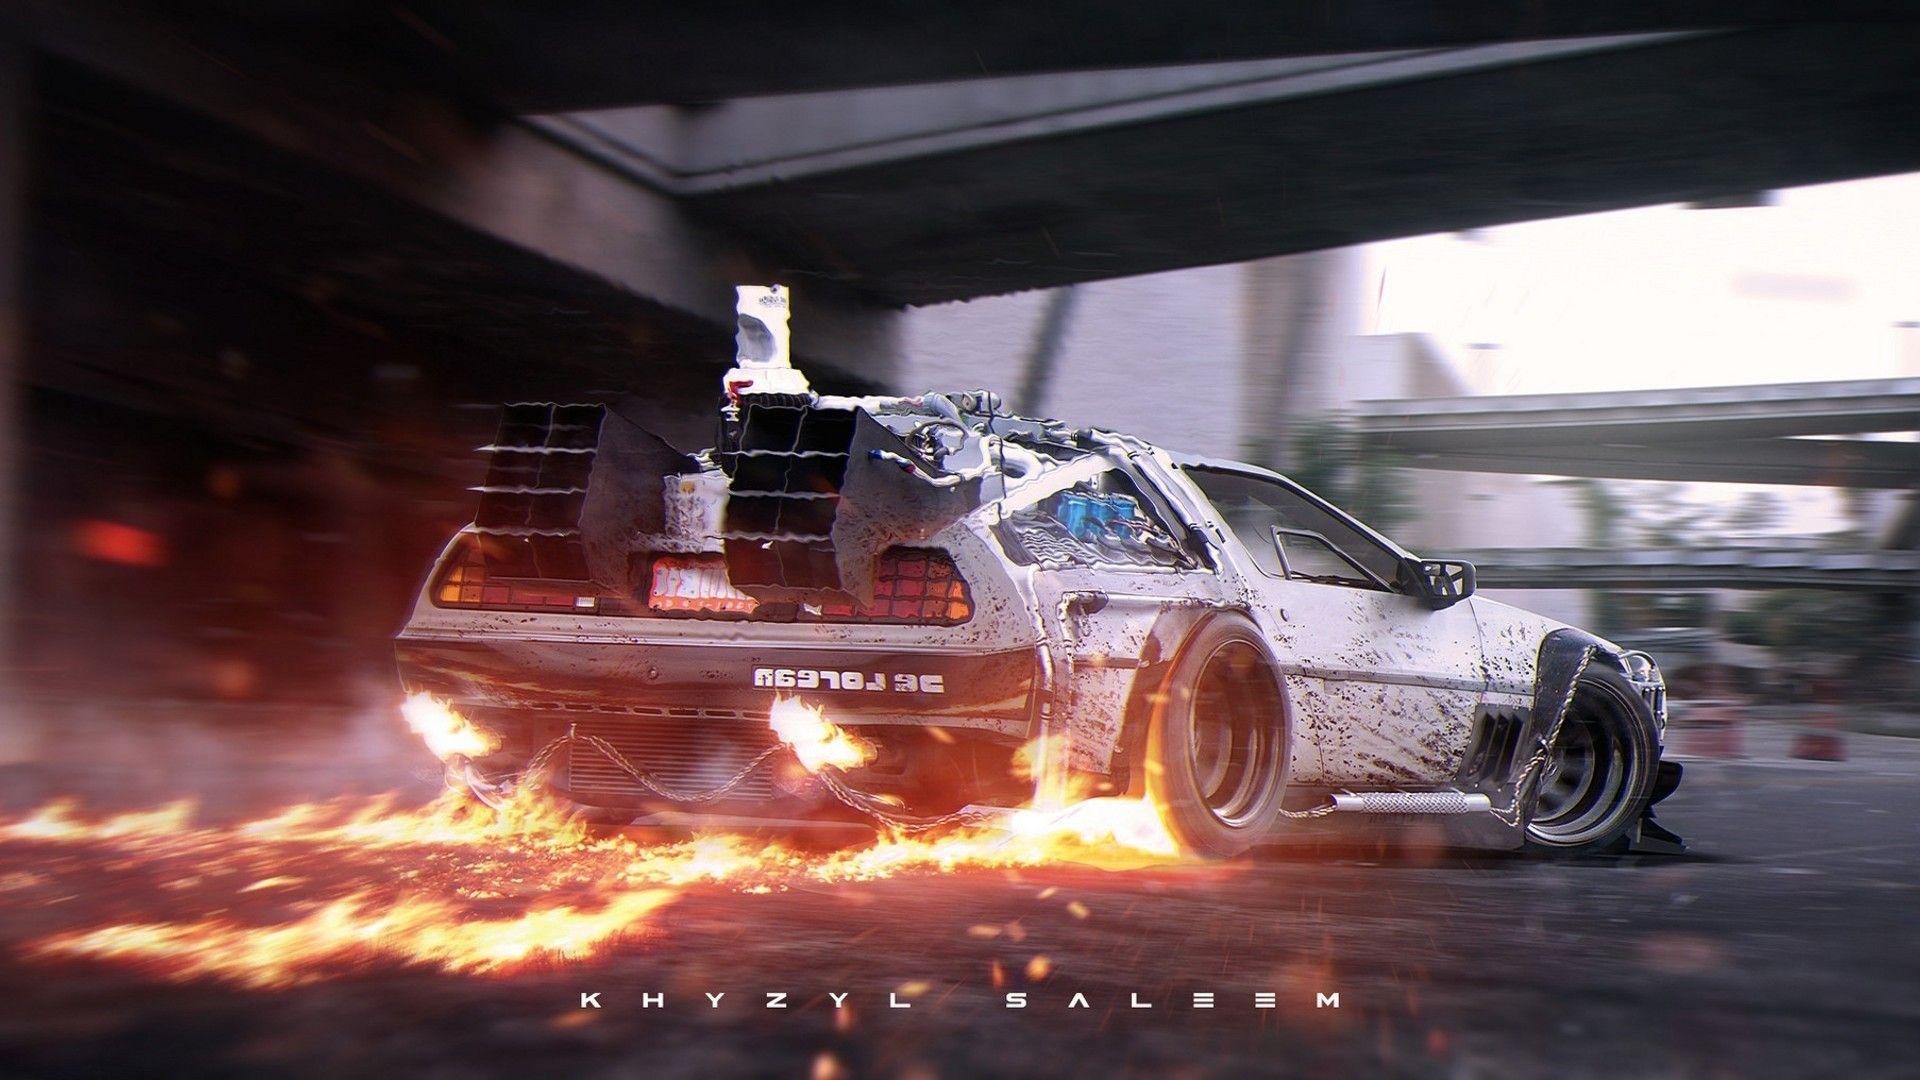 Delorean Back To The Future Wallpapers - Wallpaper Cave